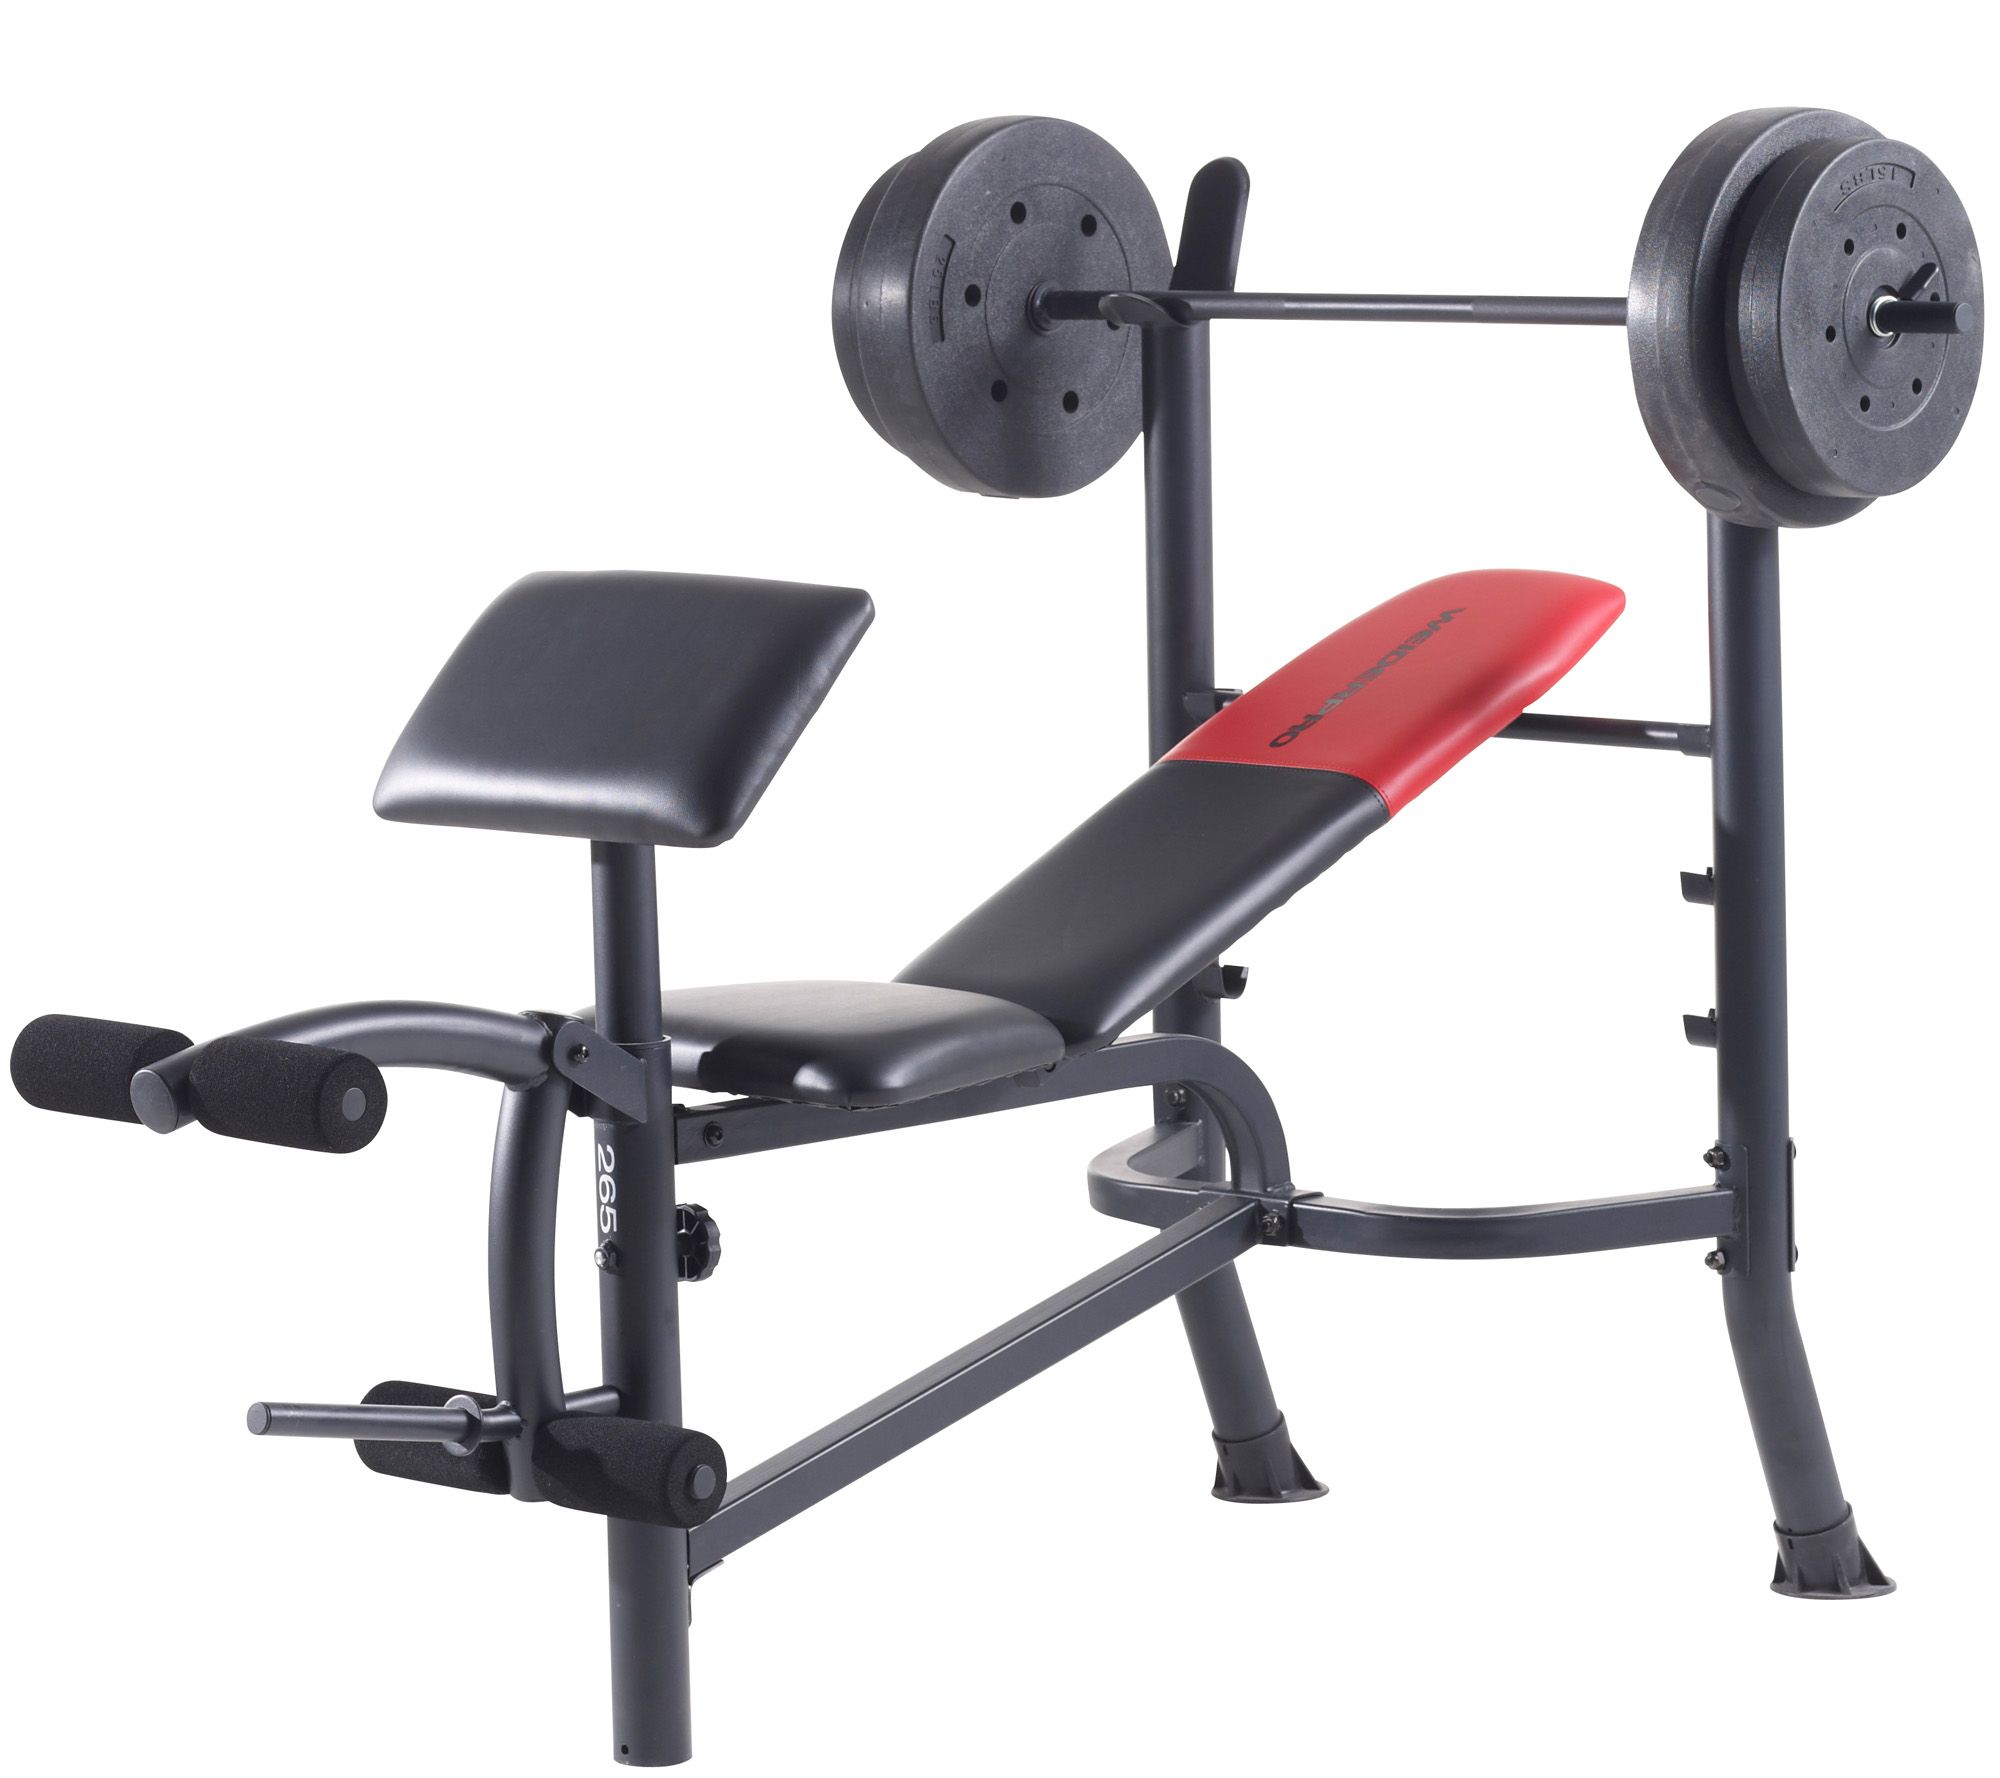 Free Ship Weider Pro 395 Exercise  Weight Bench Home Gym,Threshold Delivery 